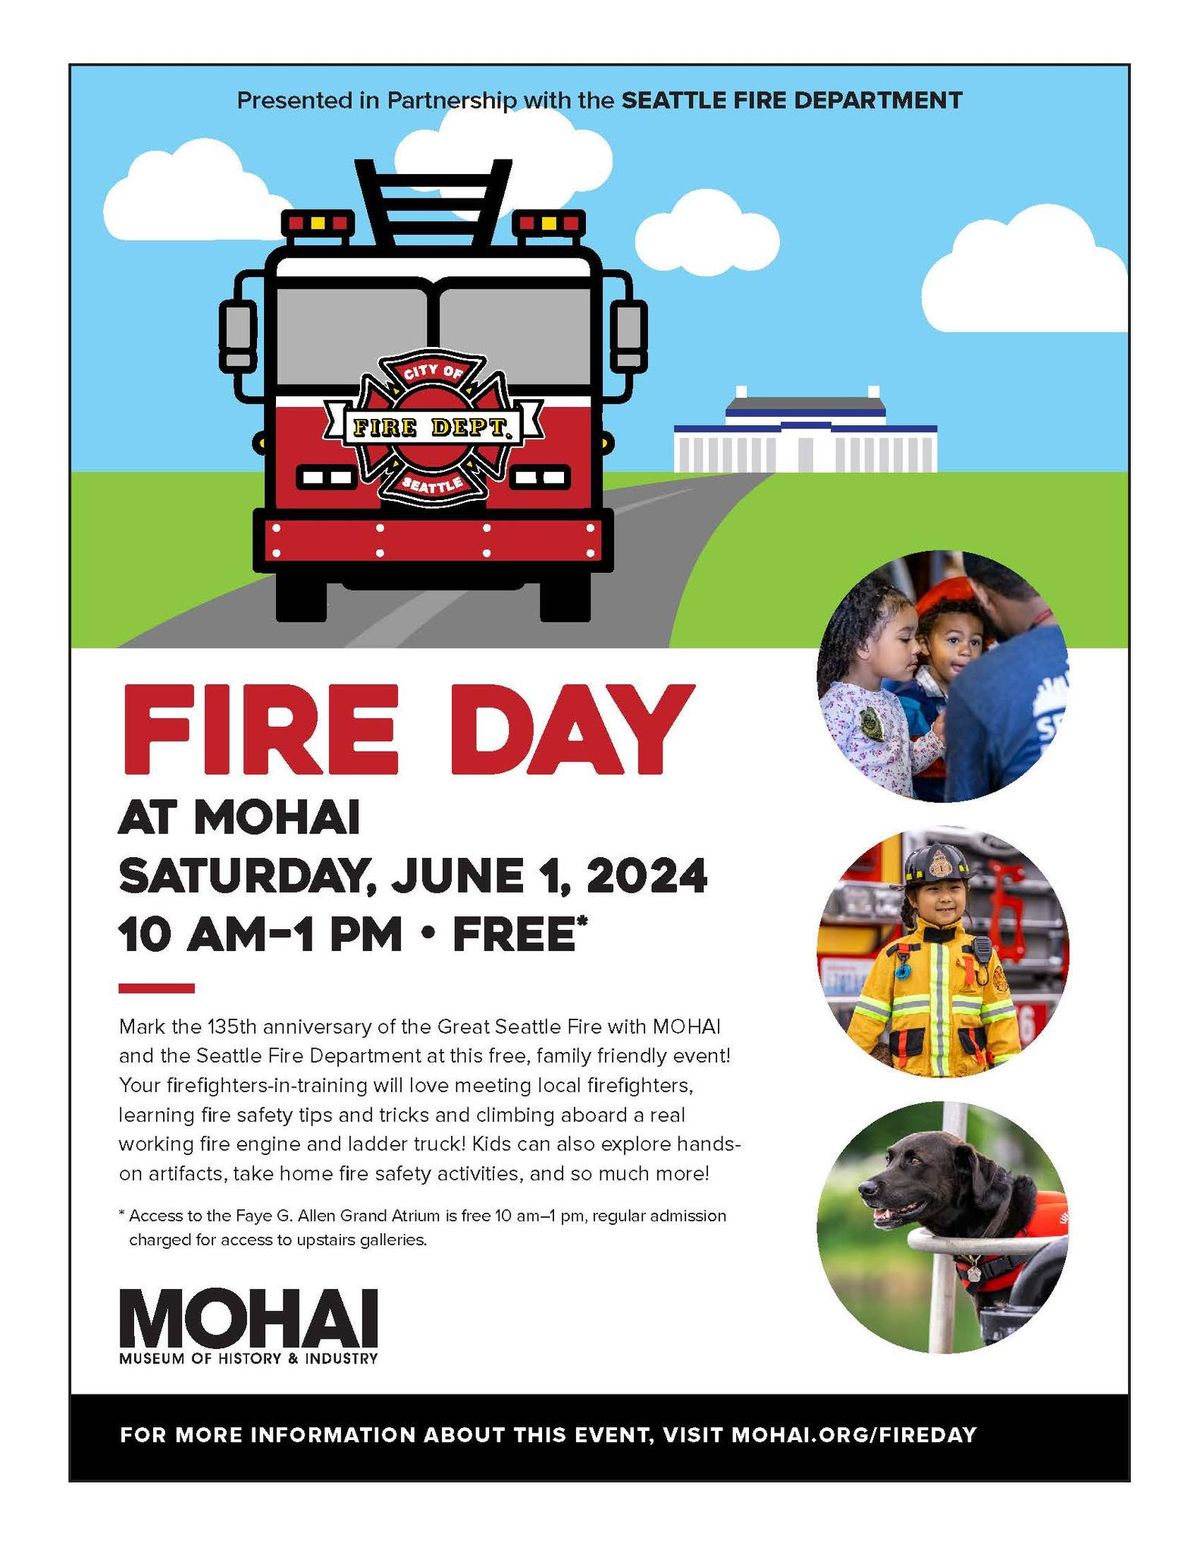 Annual Fire Day at MOHAI